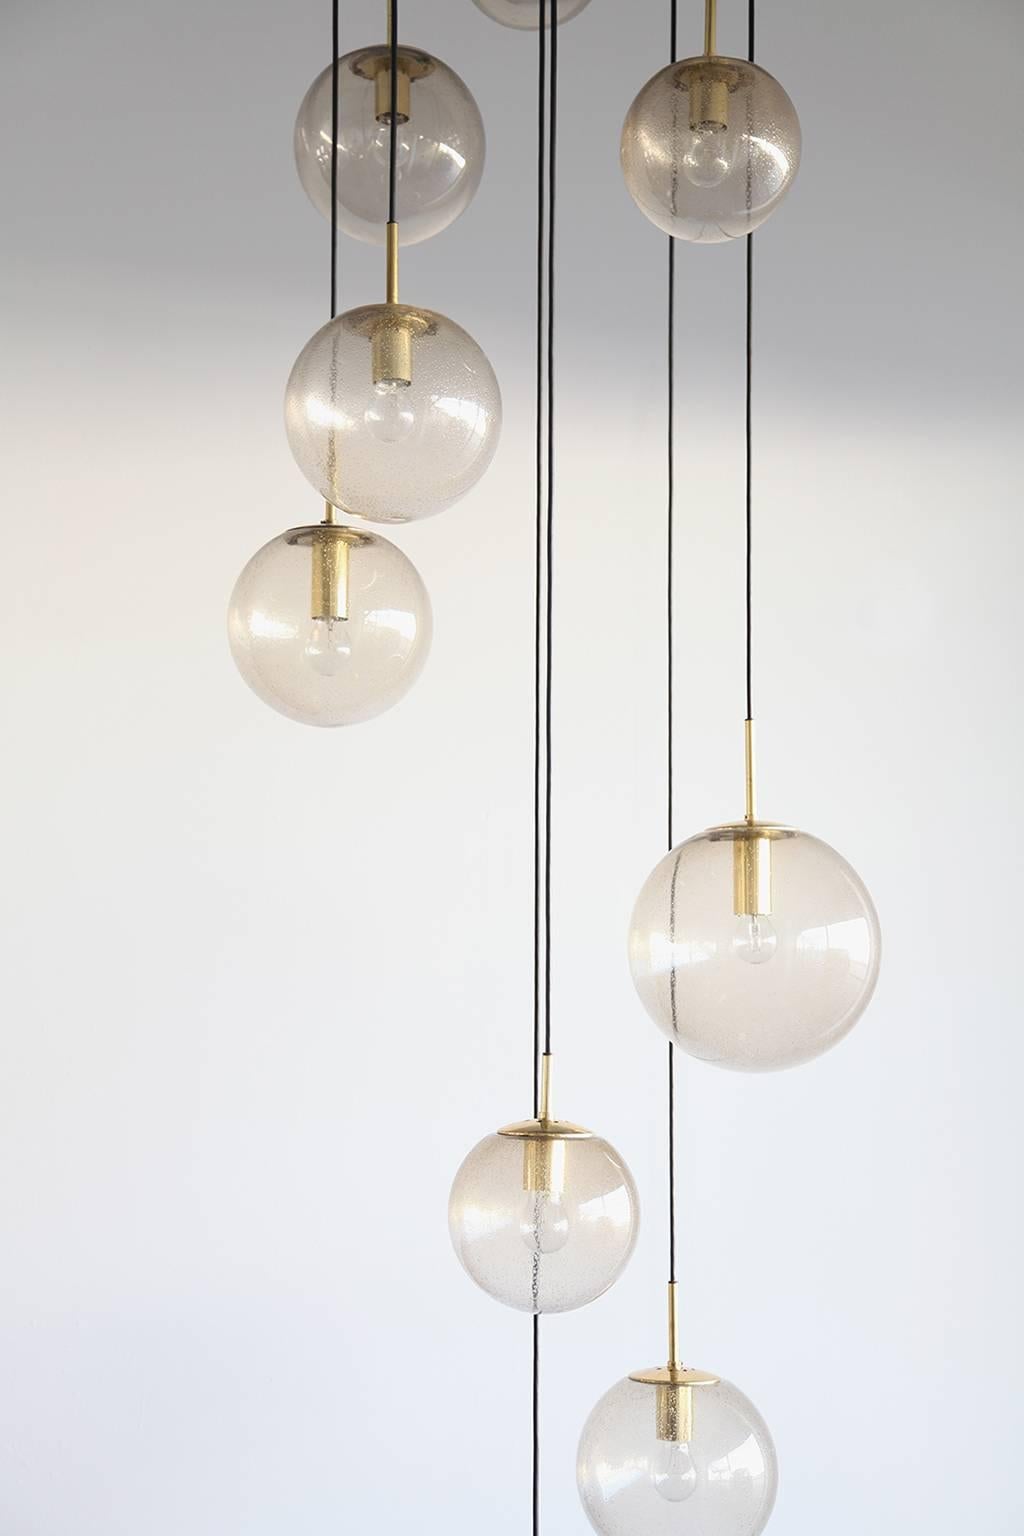 Huge and elegant Cascade lamp from the 1960s. The length of each glass can be set individually. 

Dimensions:

Three glass balls Ø 20cm
Four glass balls Ø 25cm
Two glass balls Ø 30cm

The pictures show a total height of four meters.